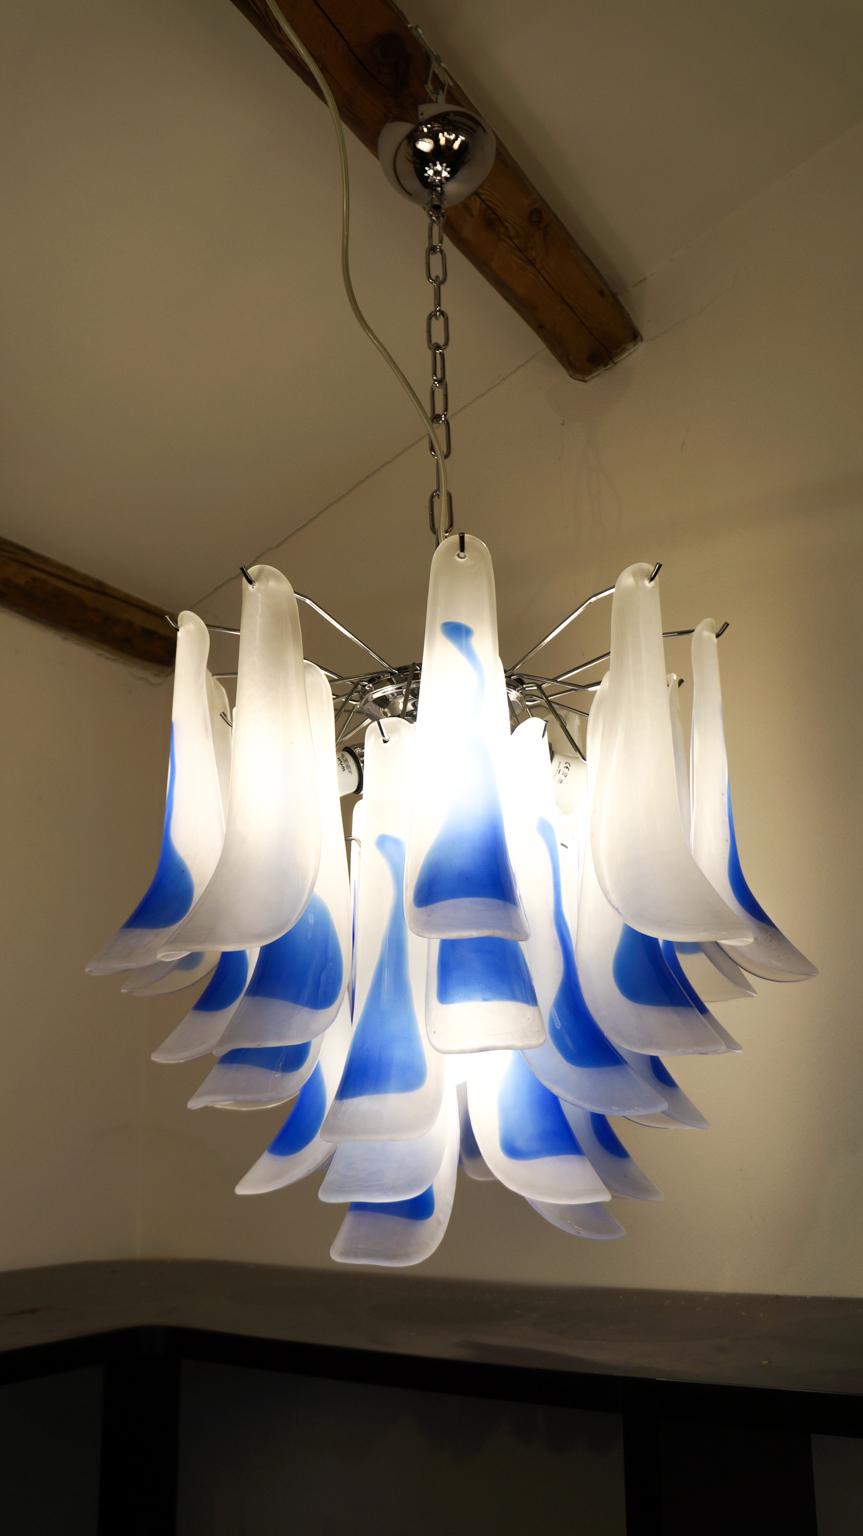 Alberto Donà Mid-Century Modern Crystal Blue Murano Glass Selle Chandelier, 1992 For Sale 1